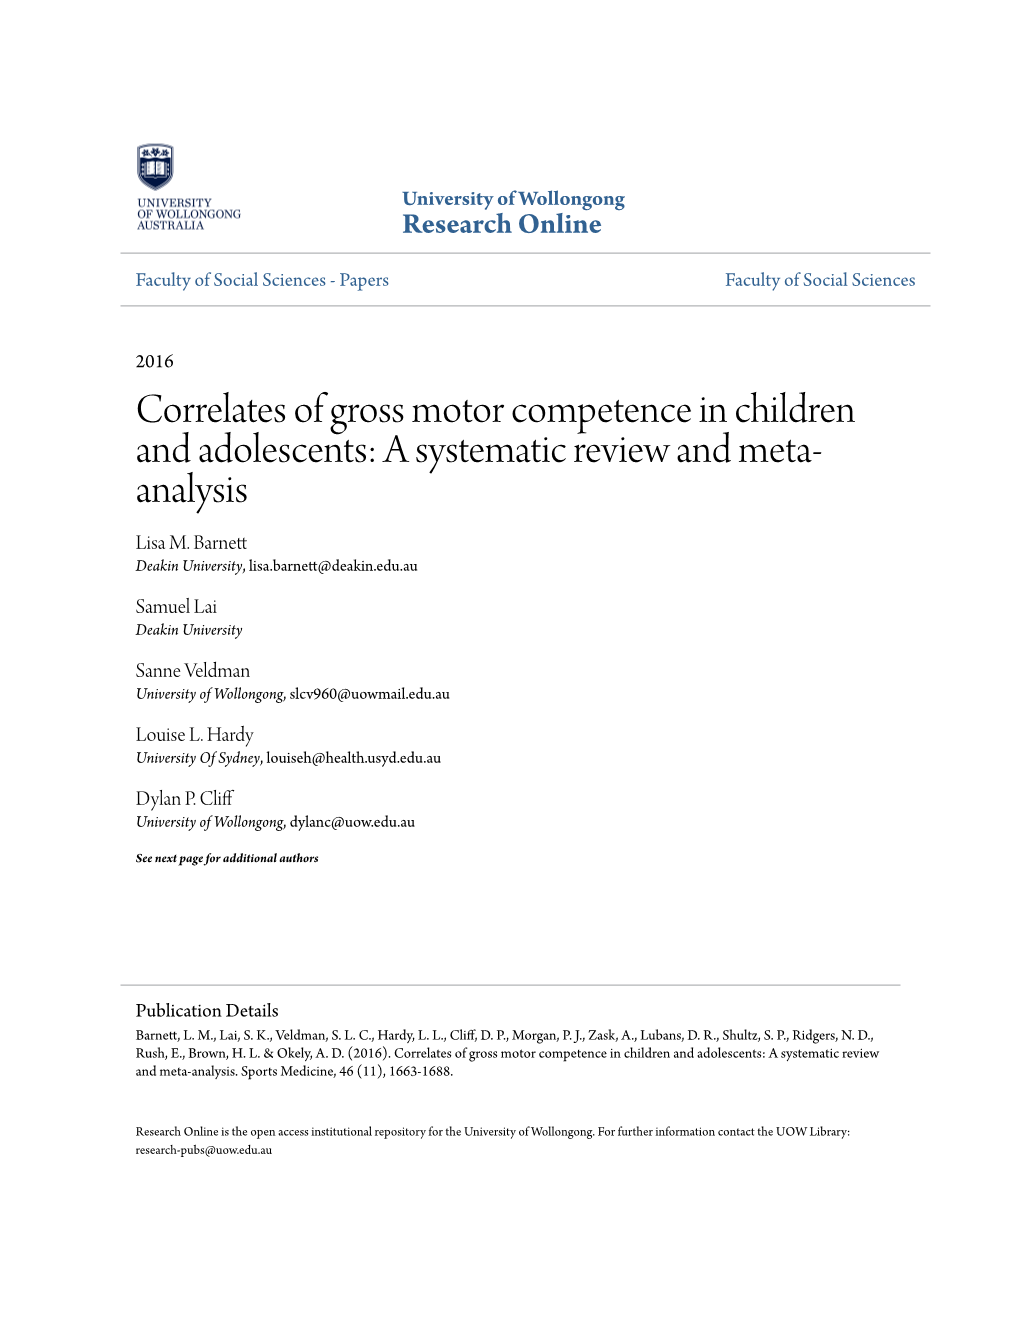 Correlates of Gross Motor Competence in Children and Adolescents: a Systematic Review and Meta- Analysis Lisa M